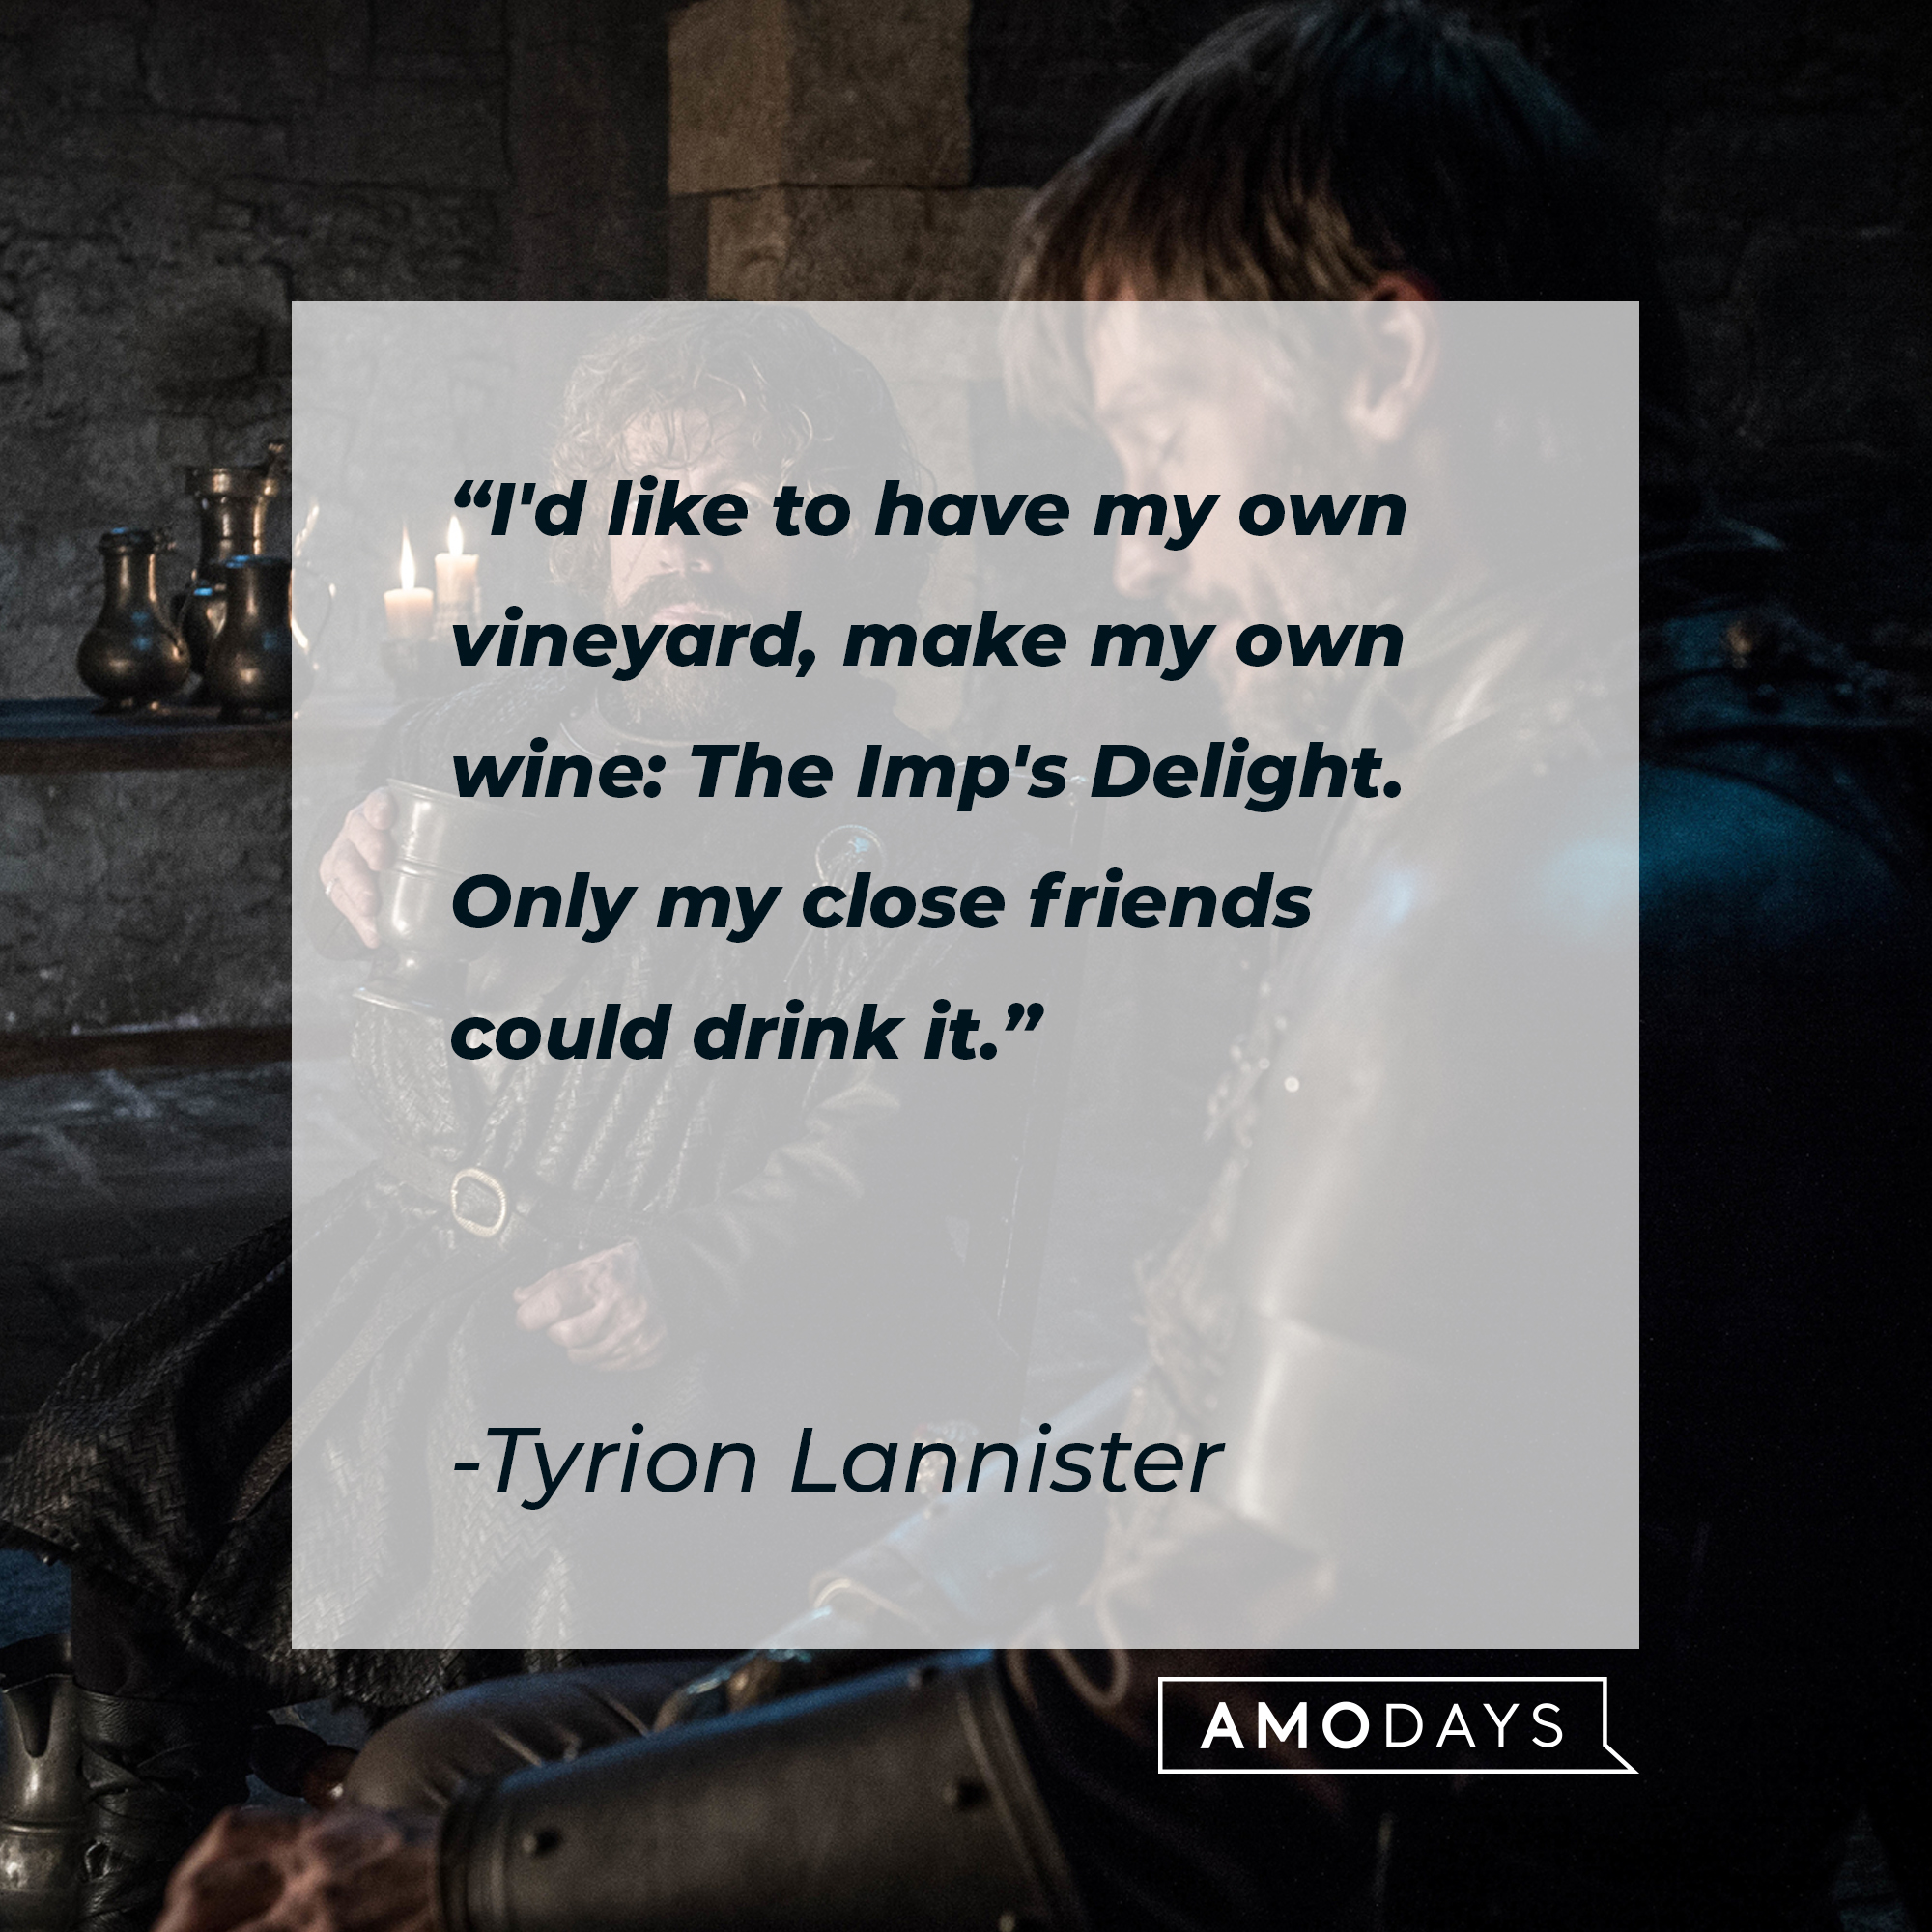 Tyrion Lannister's quote: “I'd like to have my own vineyard, make my own wine: The Imp's Delight. Only my close friends could drink it.” | Source: facebook.com/GameOfThrones